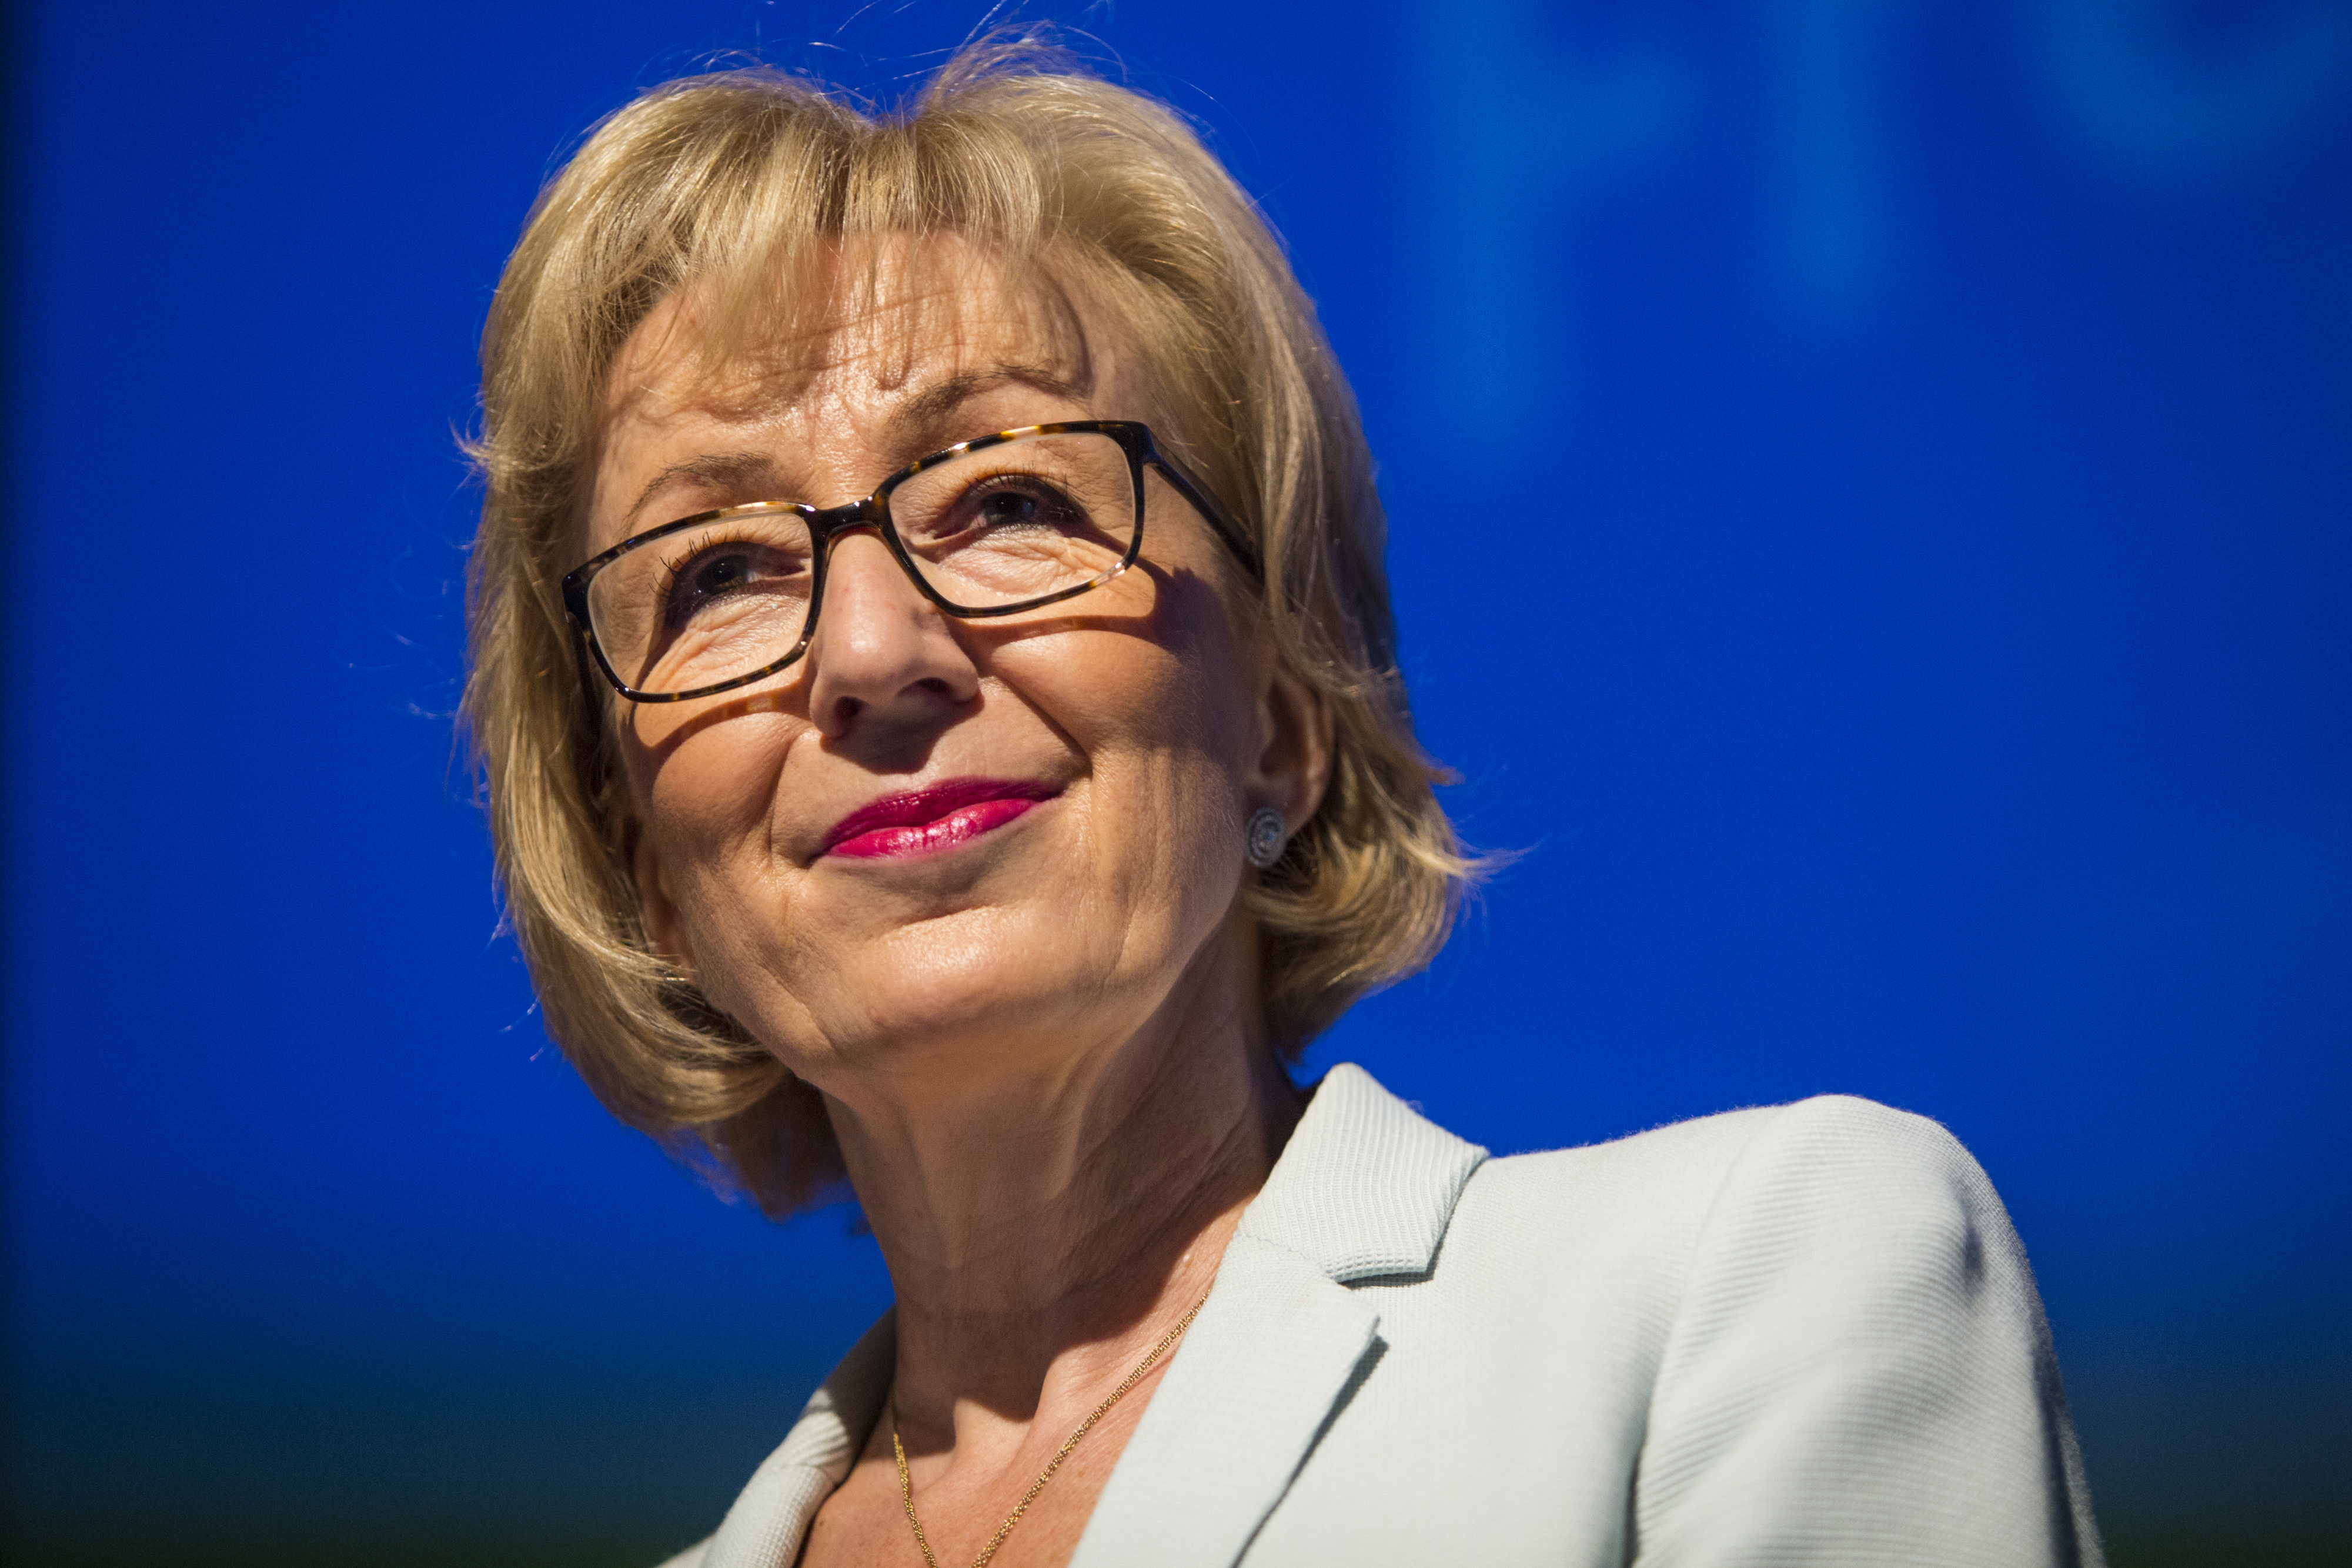 Andrea Leadsom Holds A Rally To Bid For Support In The Conservative Leadership